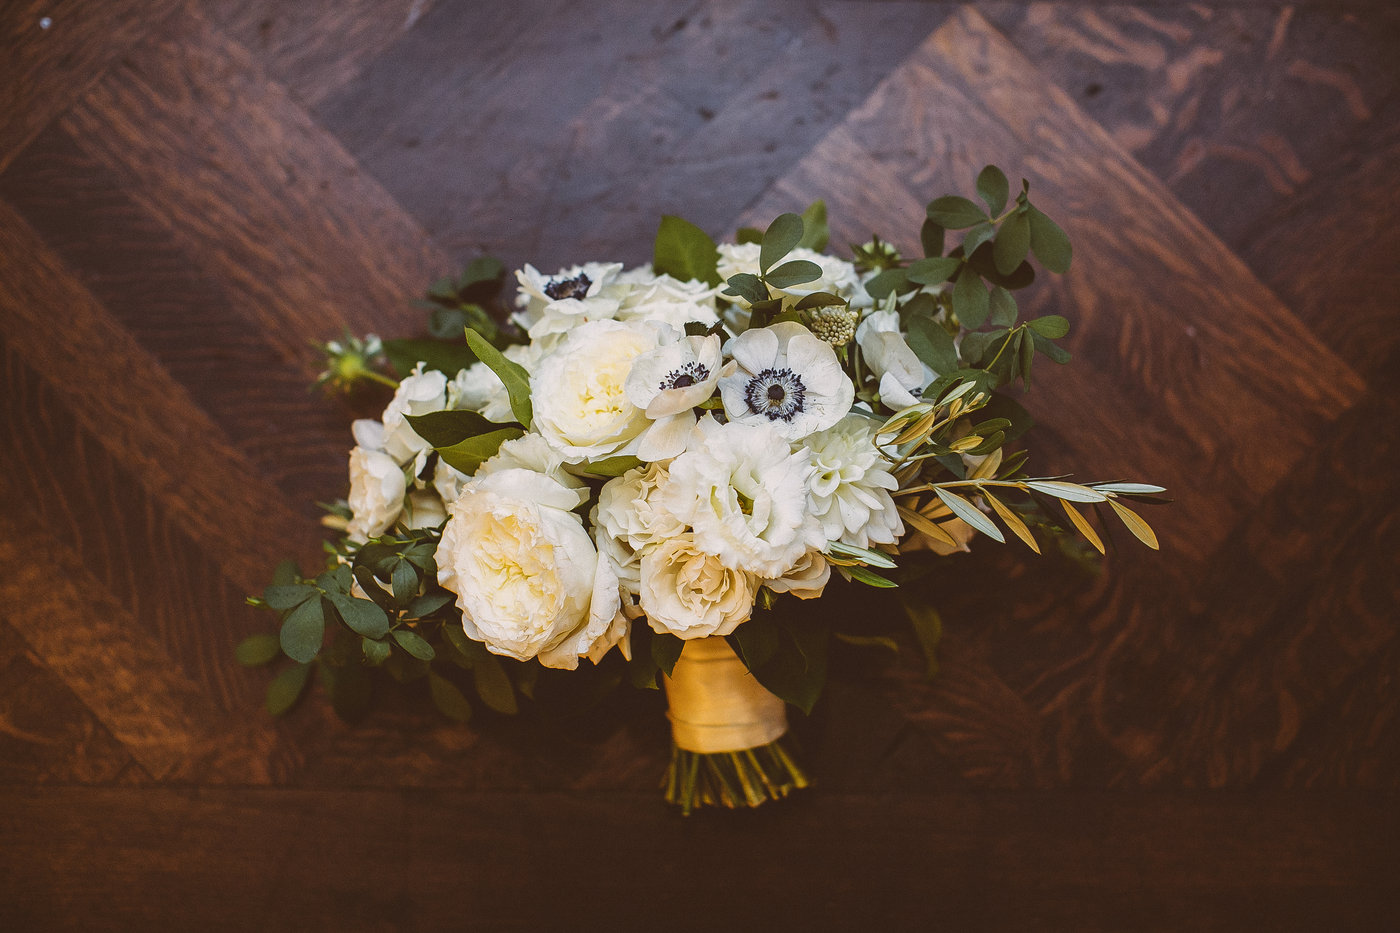 Bride's monochromatic bouquet of garden roses, white anemone, eucalyptus, and lisianthus with gold band.